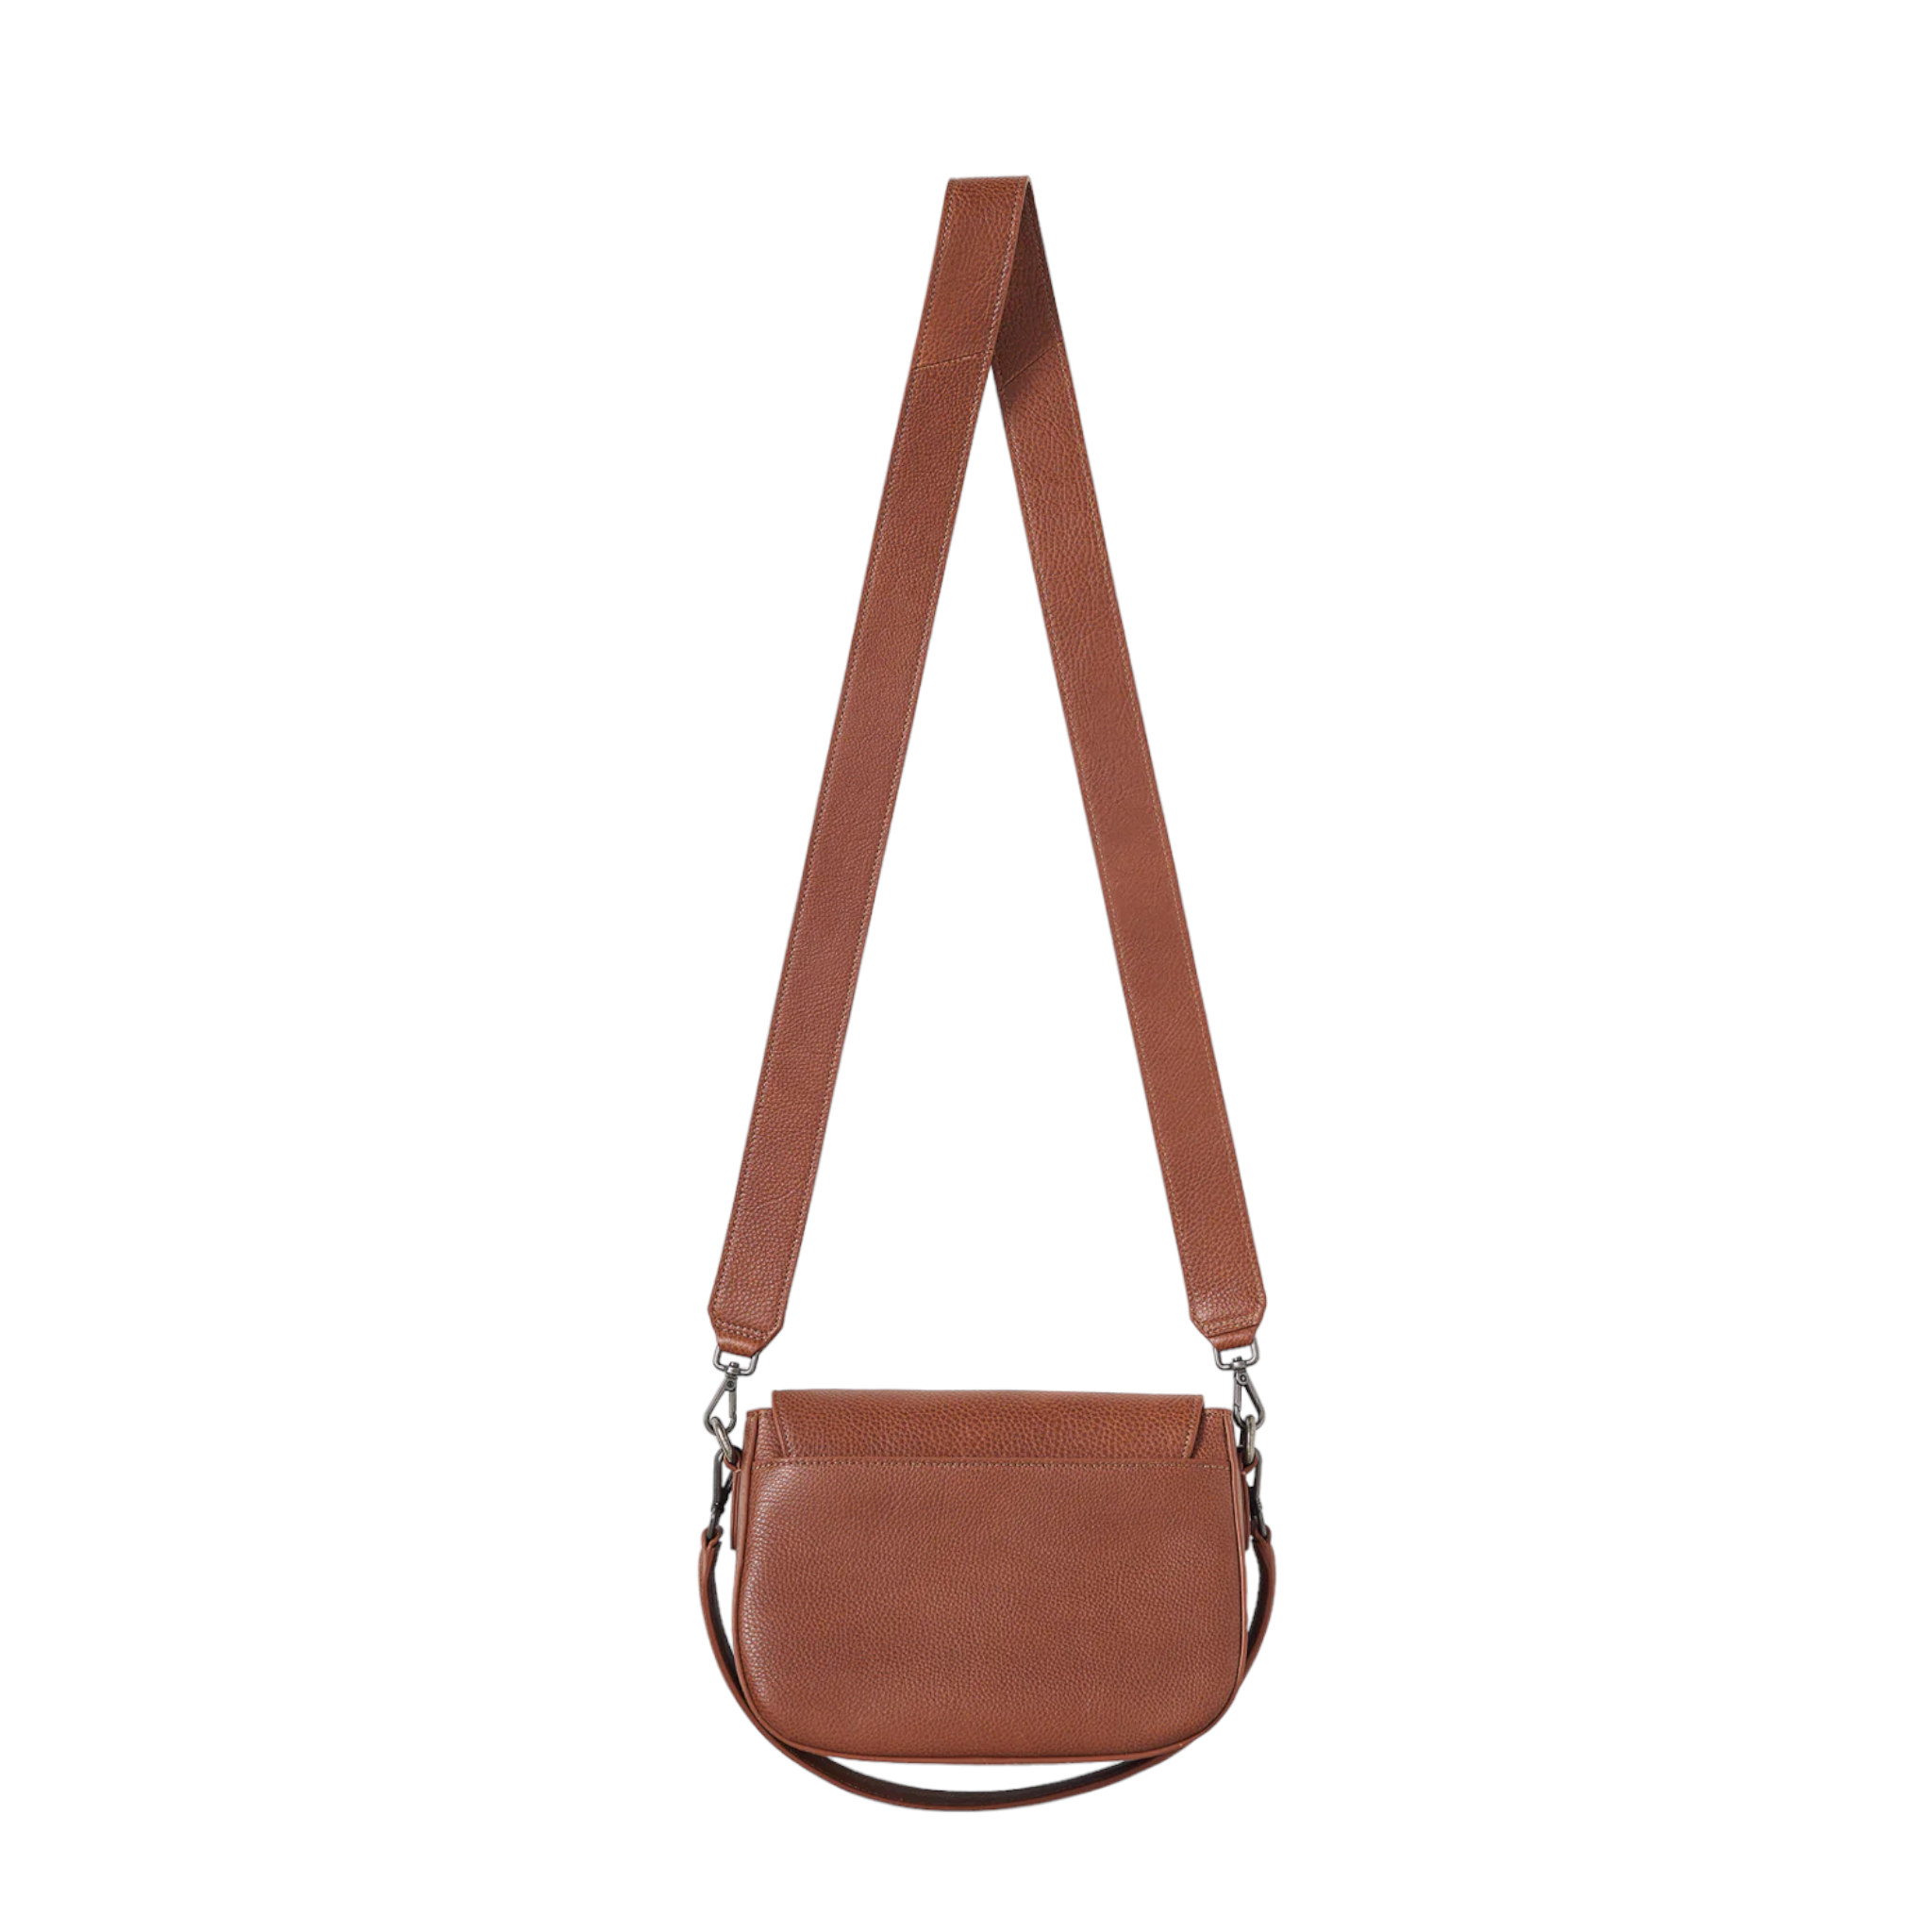 Front view of Quintana Briarwood Chestnut coloured handbag. Crafted with fine leather, with a shoulder strap and a short strap.